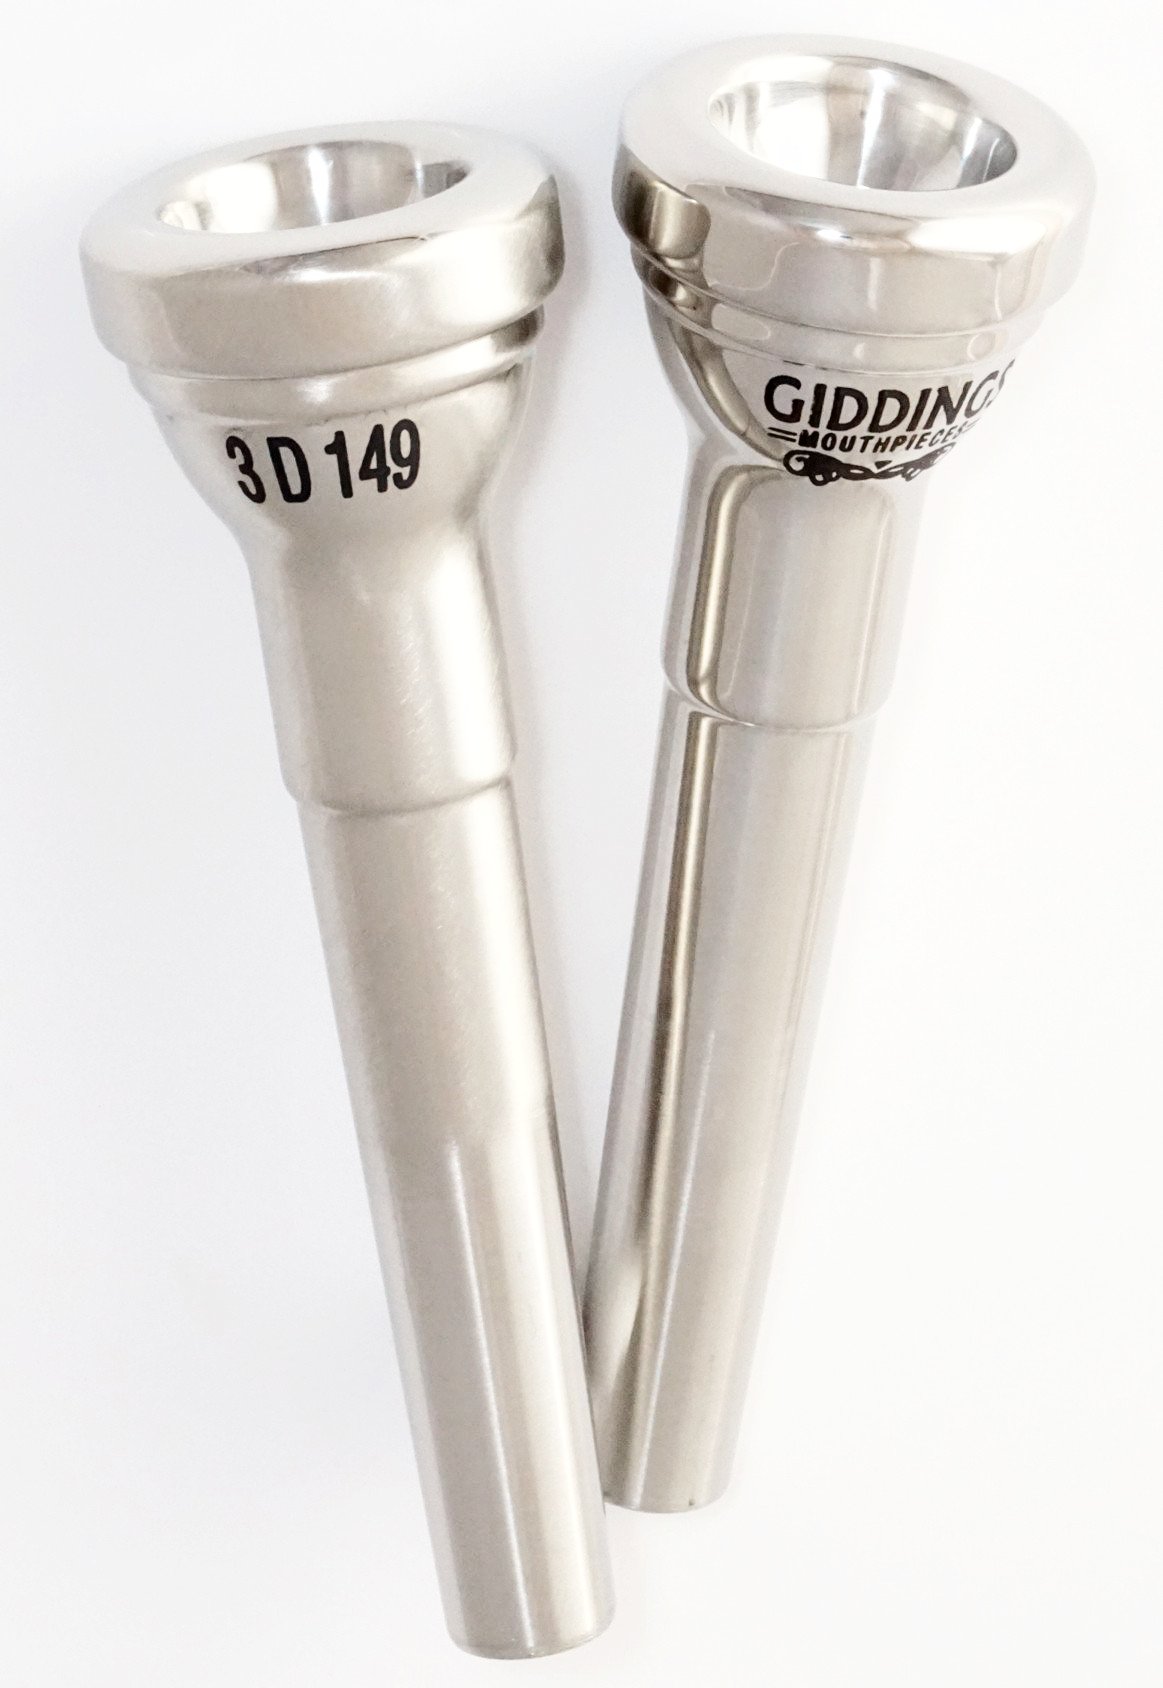 The 5 Best Trumpet Mouthpieces for High Notes